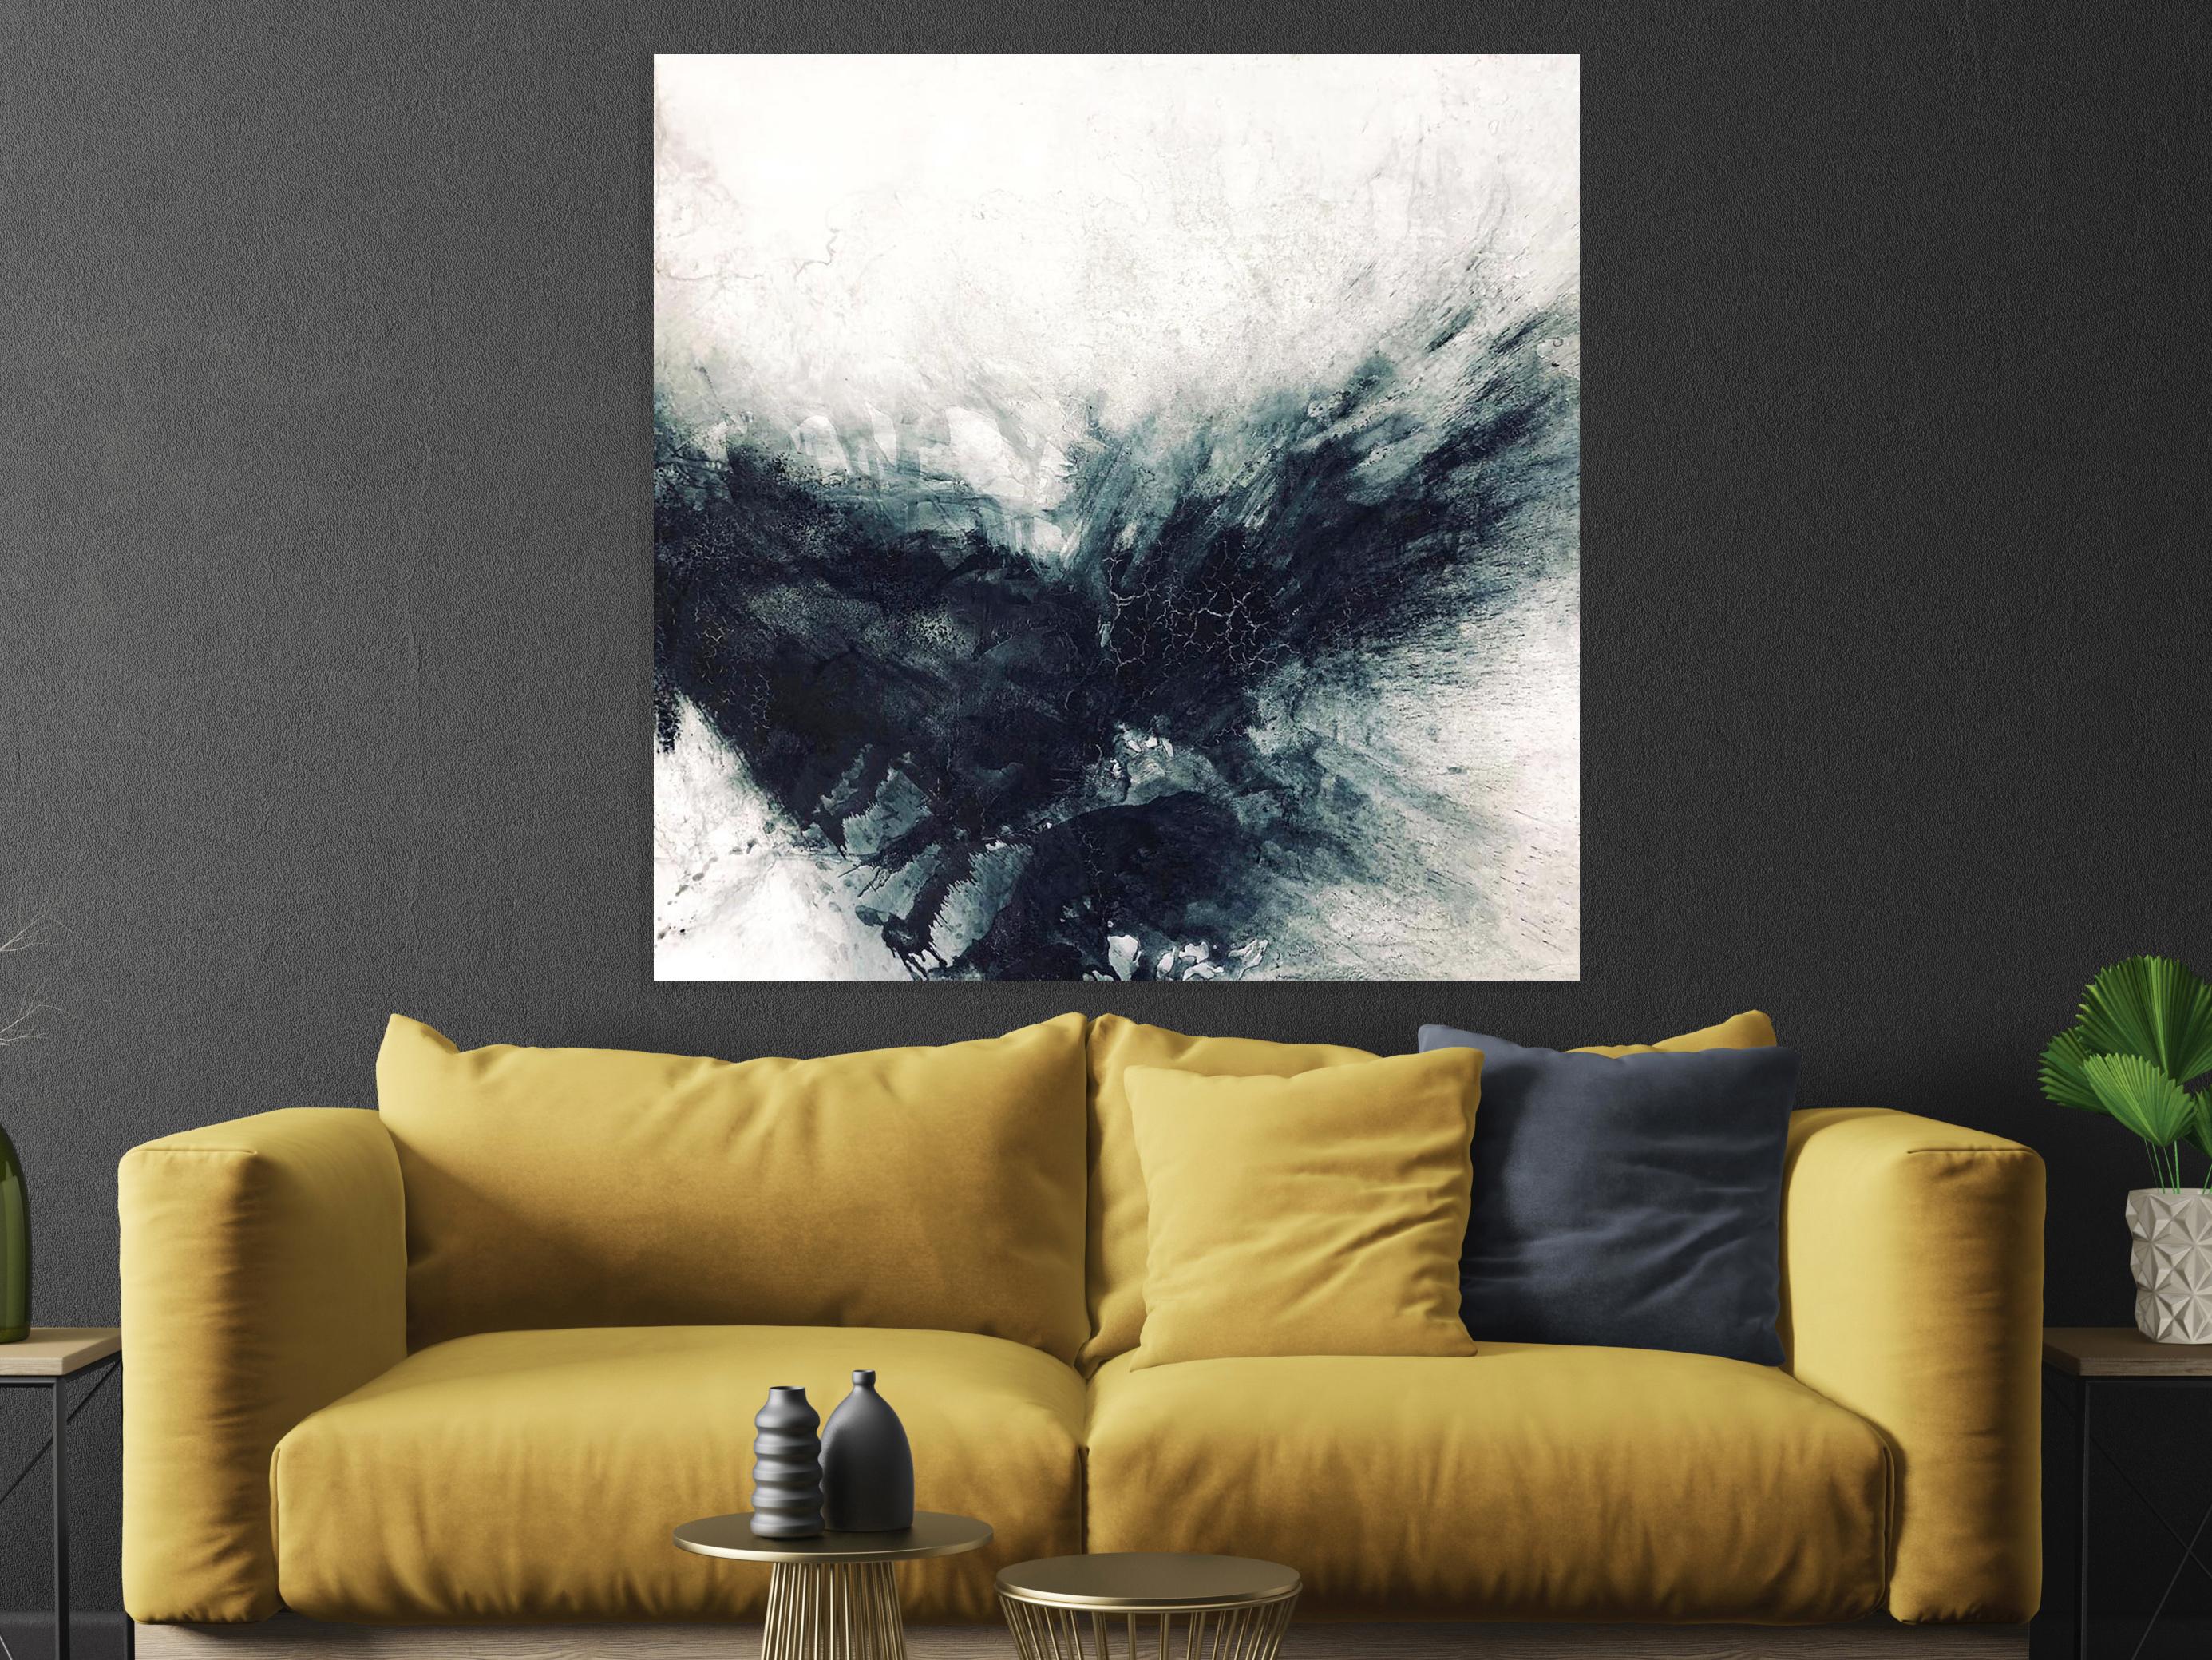 BLACK & GRAY III Fine Art with Hand Embellishment on Giclee Canvas Made to Order - Painting by John Beard